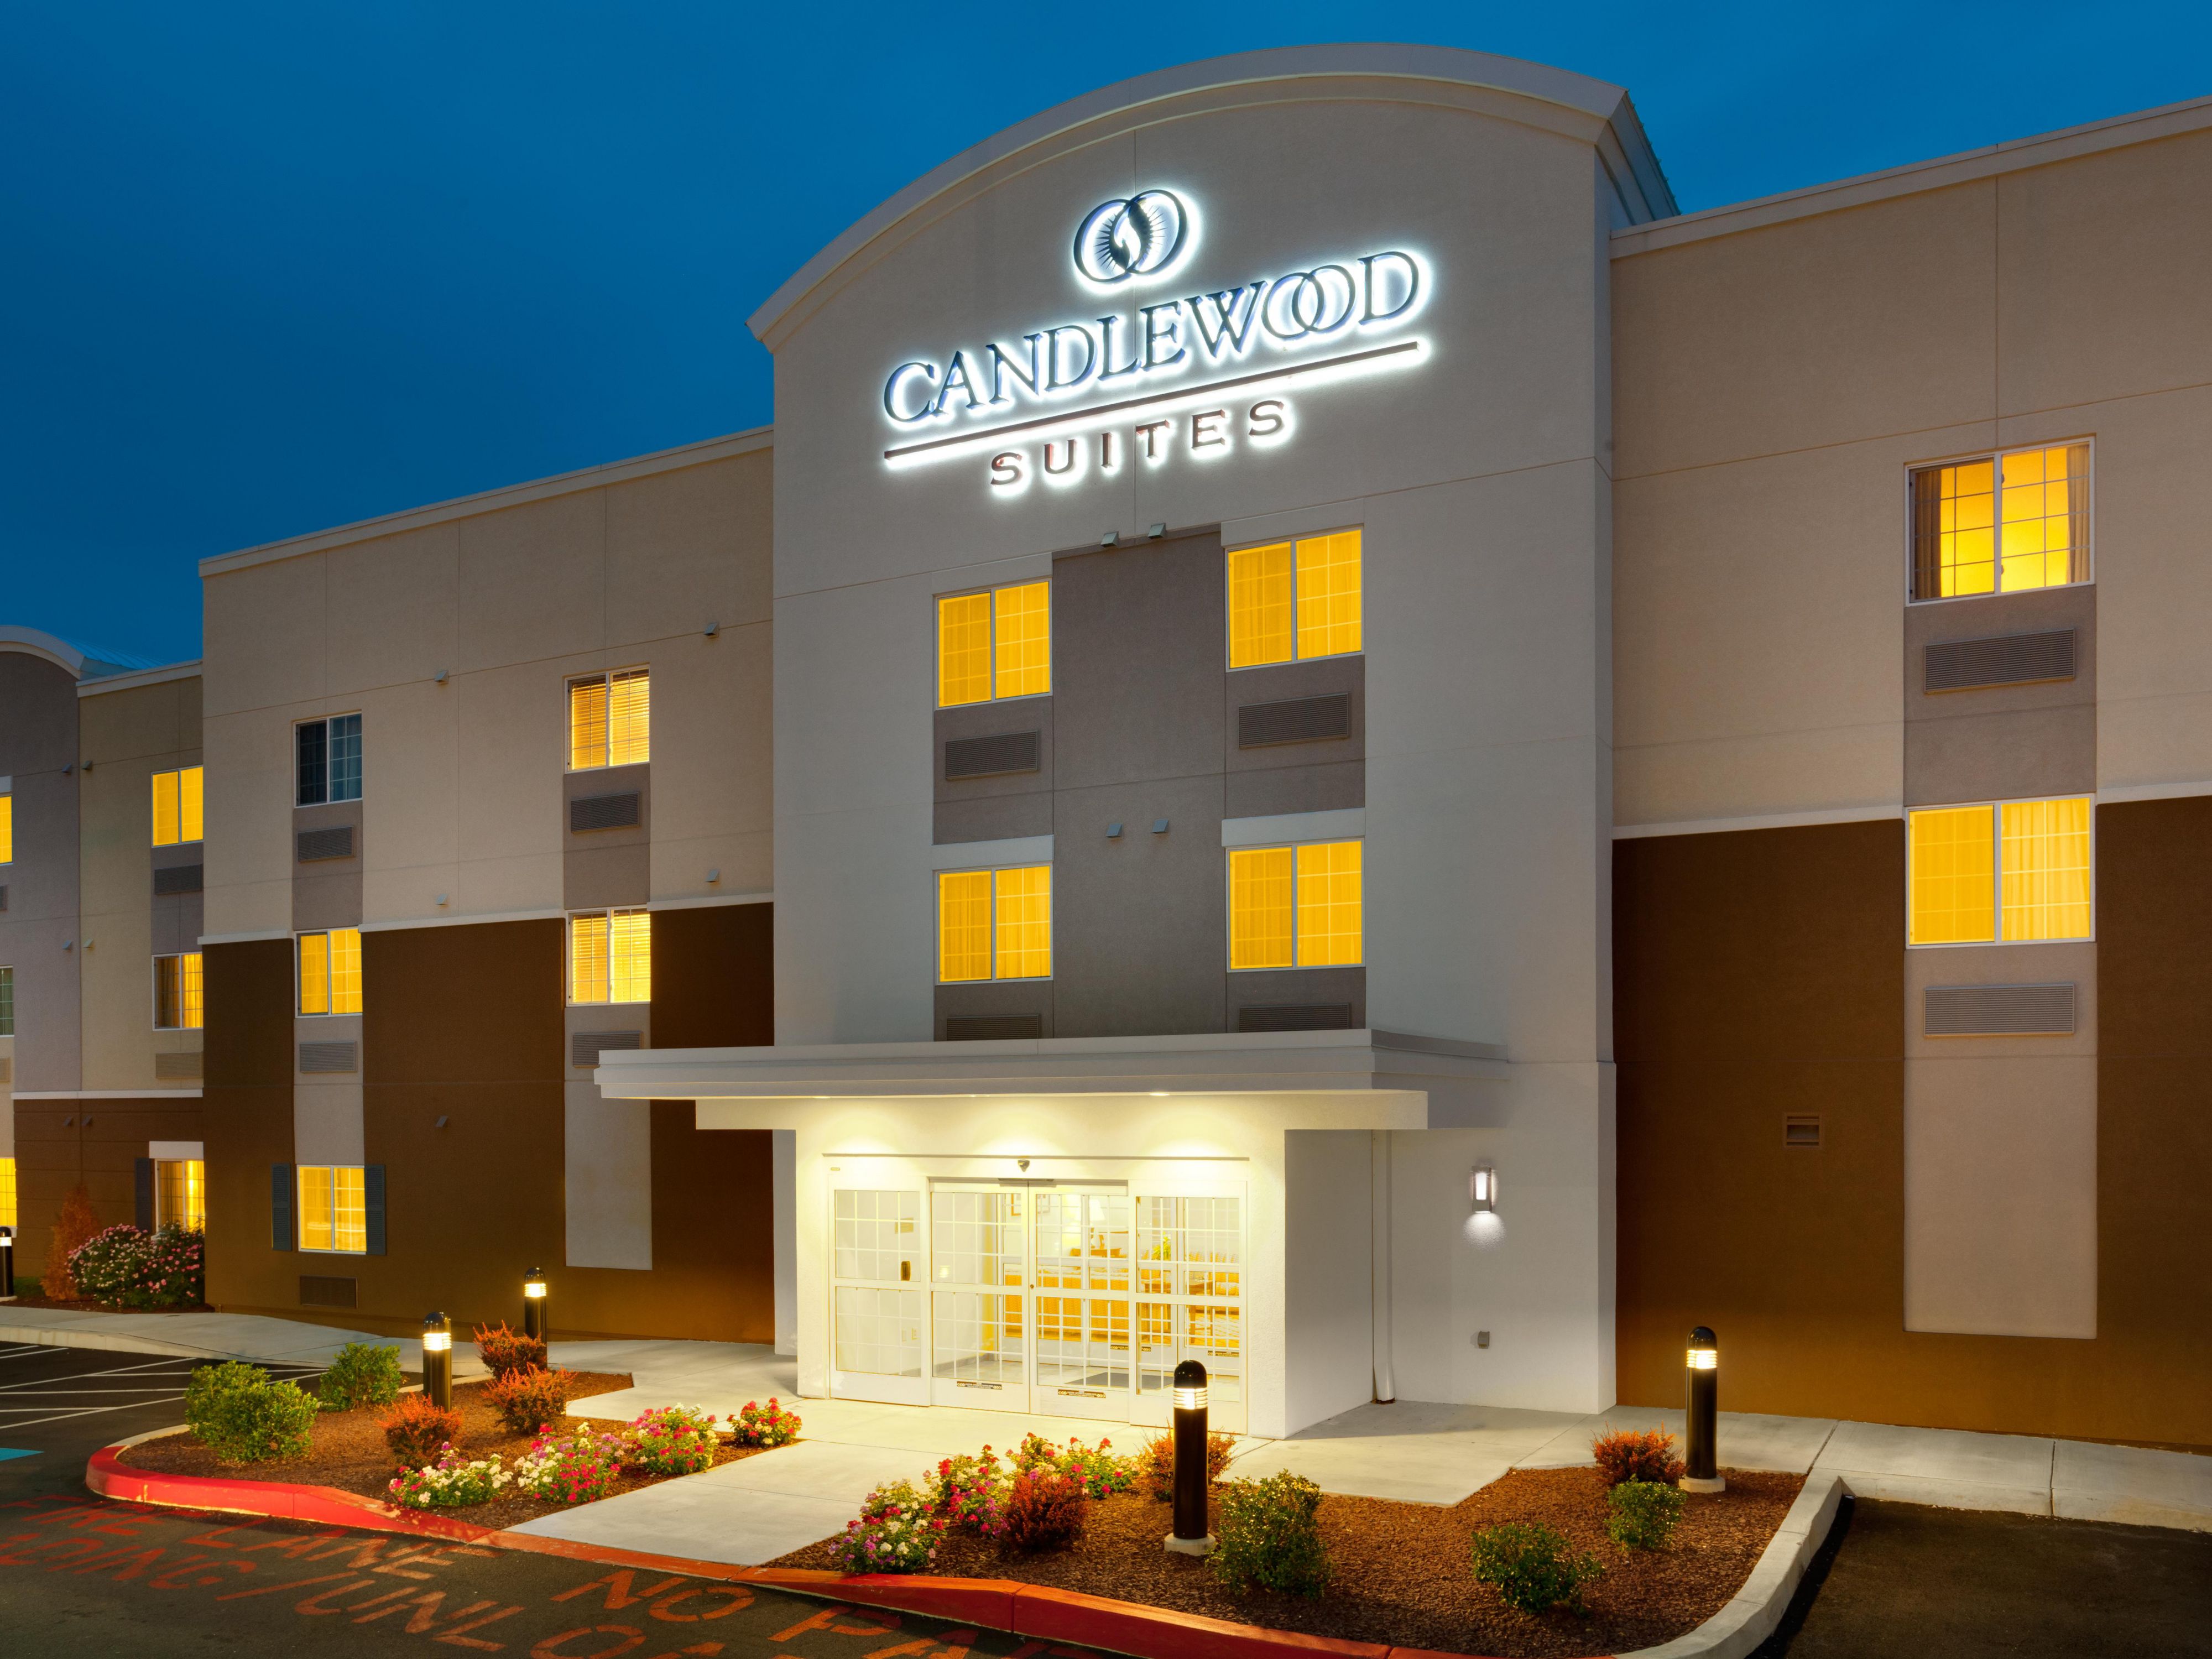 Harrisburg Hotels: Candlewood Suites Harrisburg - Extended Stay Hotel